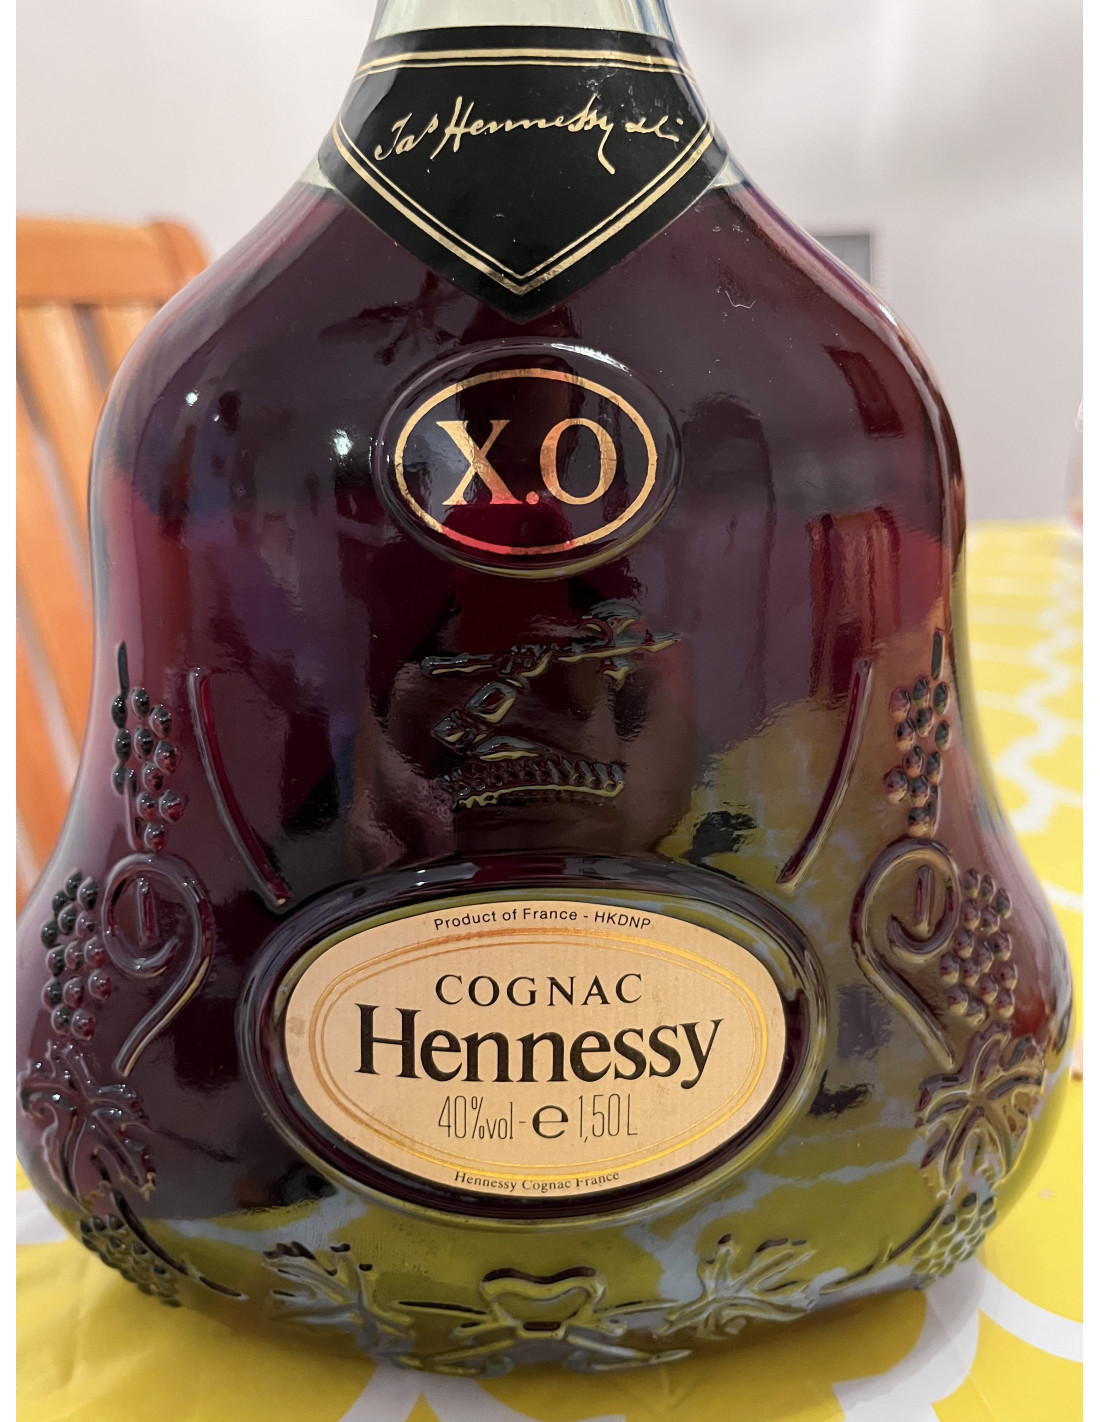 Hennessy Cognac - Prices - All Products